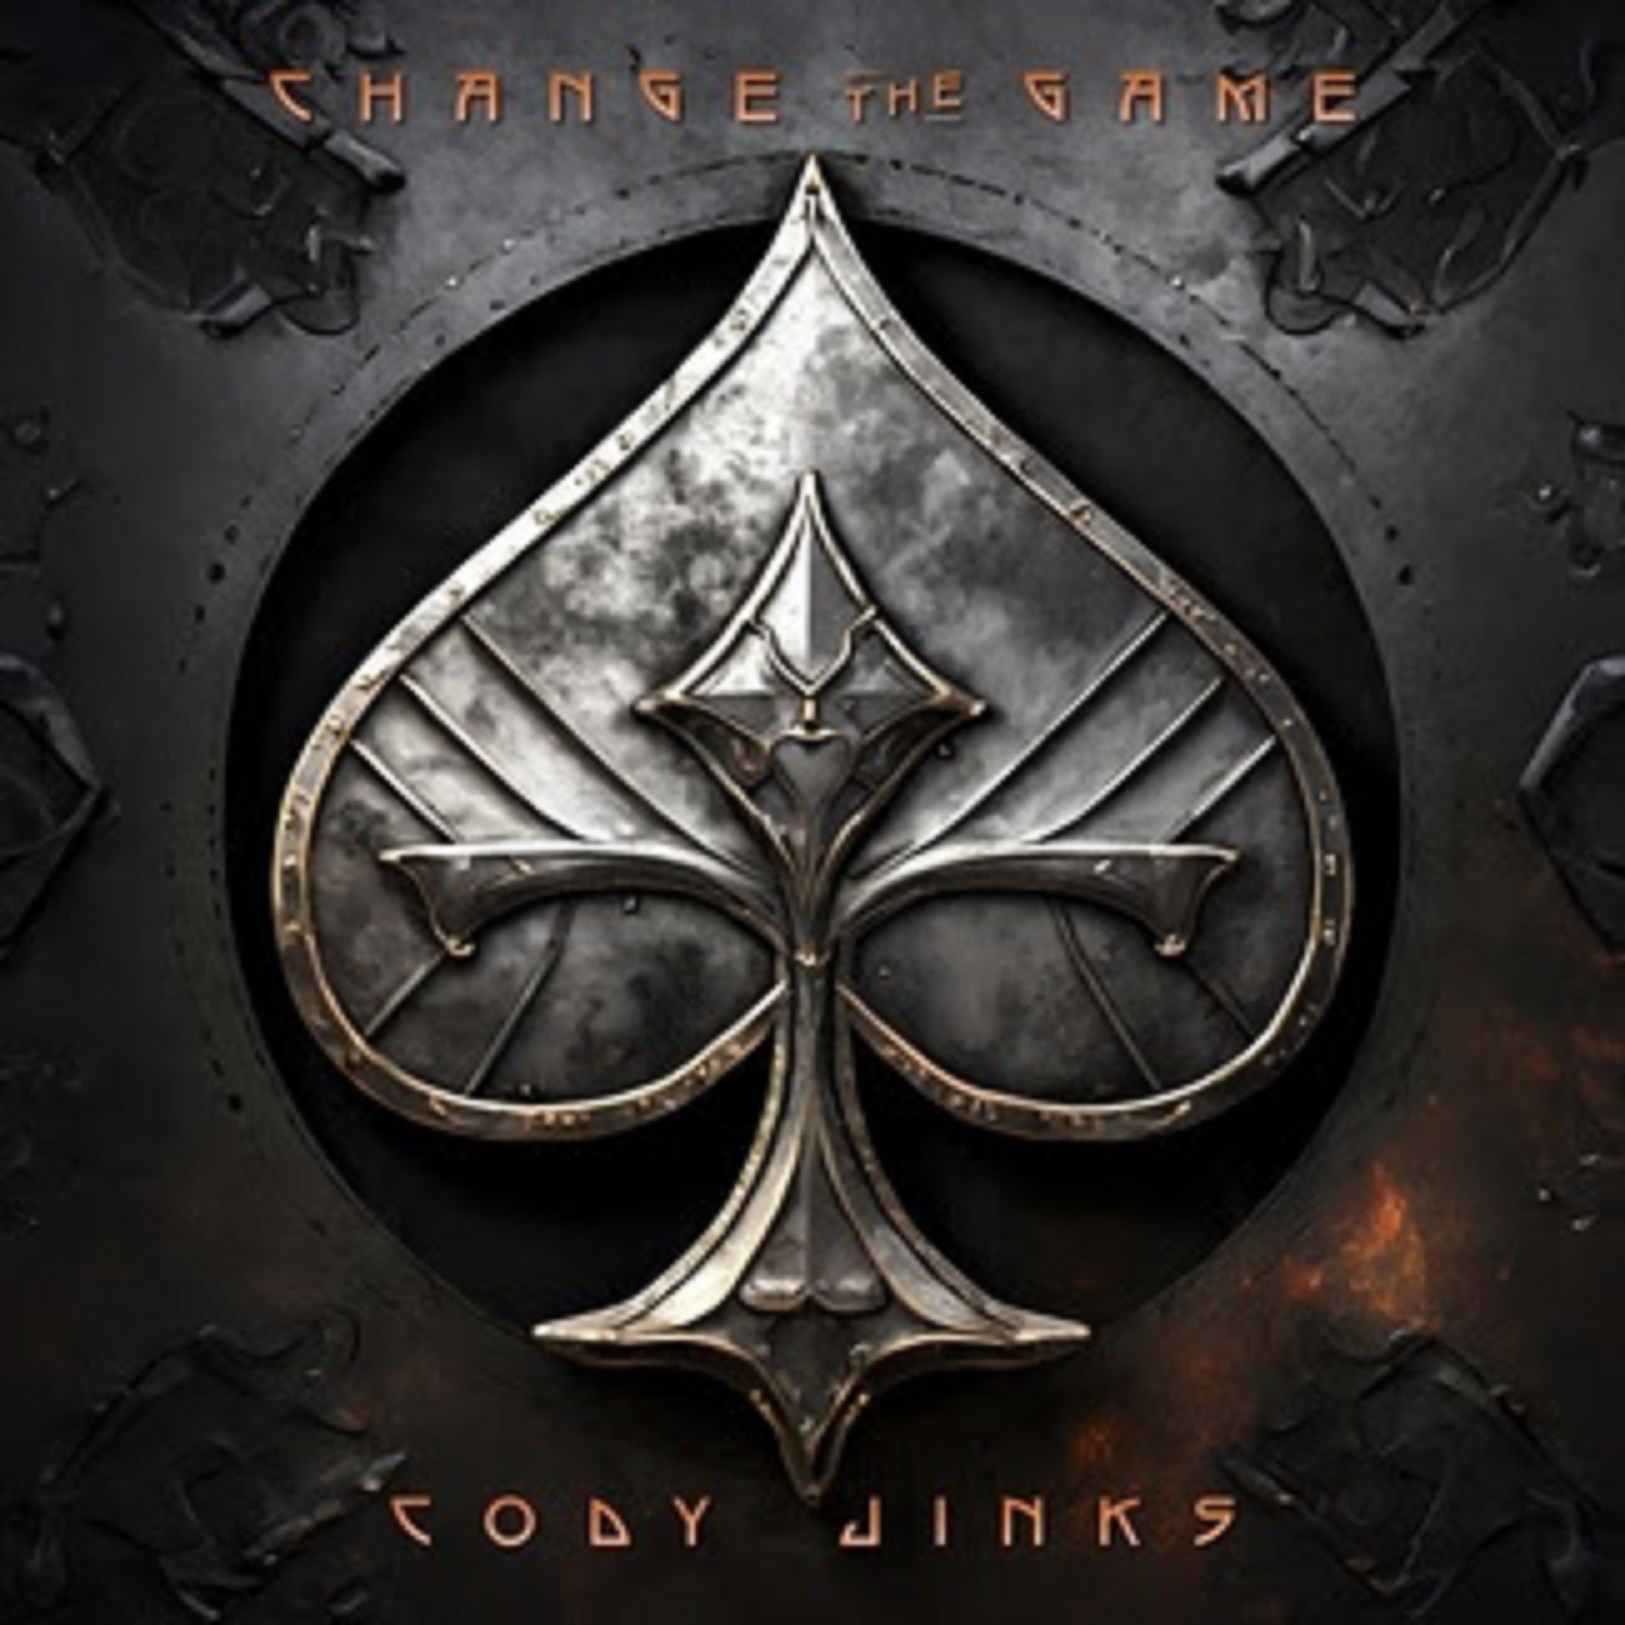 Cody Jinks’ anticipated new album "Change The Game" out March 22 via Late August Records, “Sober Thing” debuts today